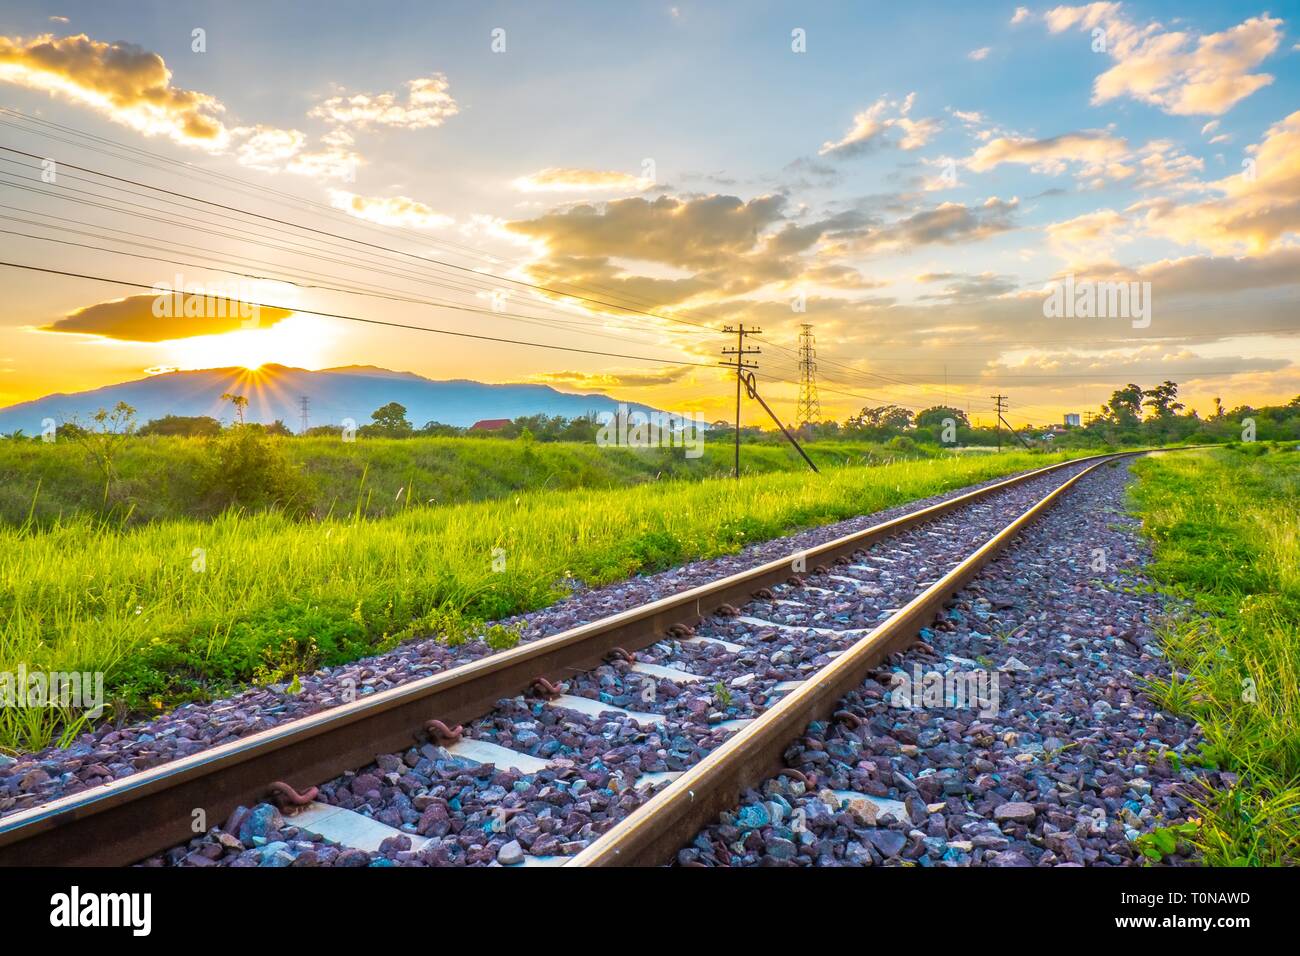 Chiang Mai Railway Track in countryside with Green Grass along the way in Summer Evening before Sunset. Wallpaper Background of Railroad in Afternoon. Stock Photo